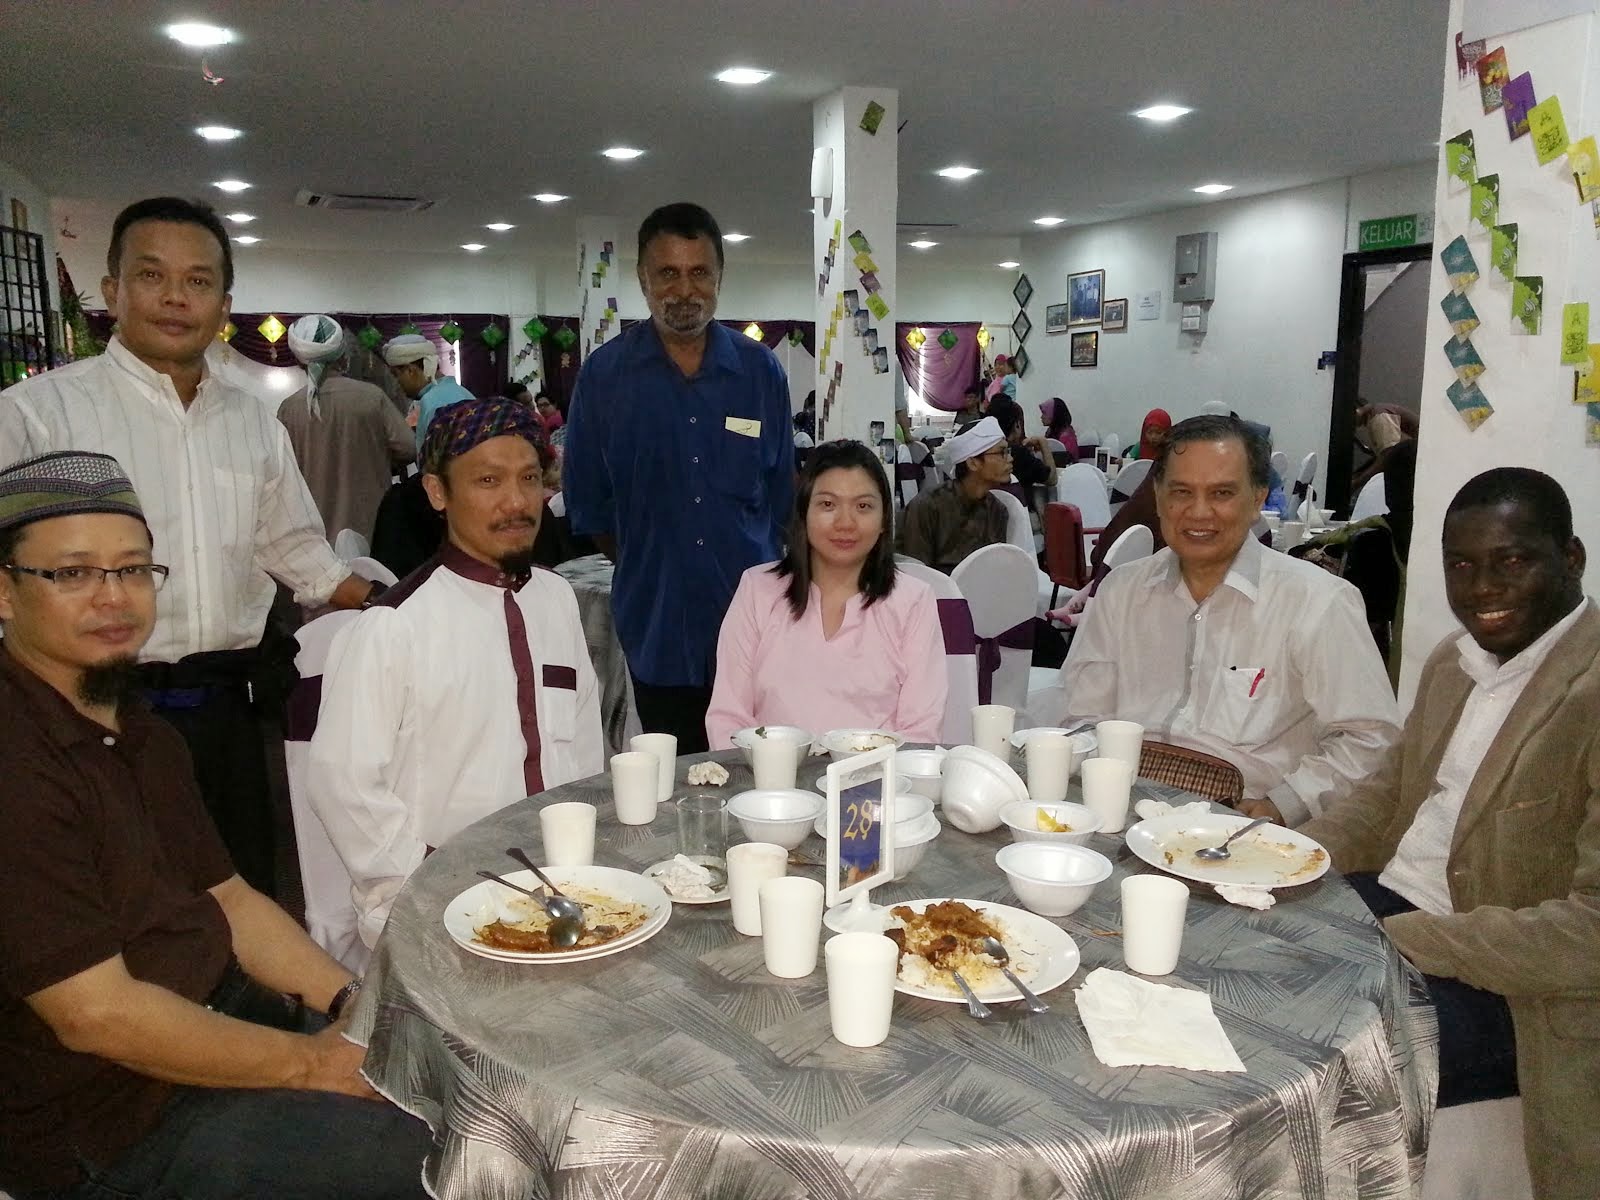 Fiona breaking fast with Dato Seri and his partner in Restaurant PAK TAM